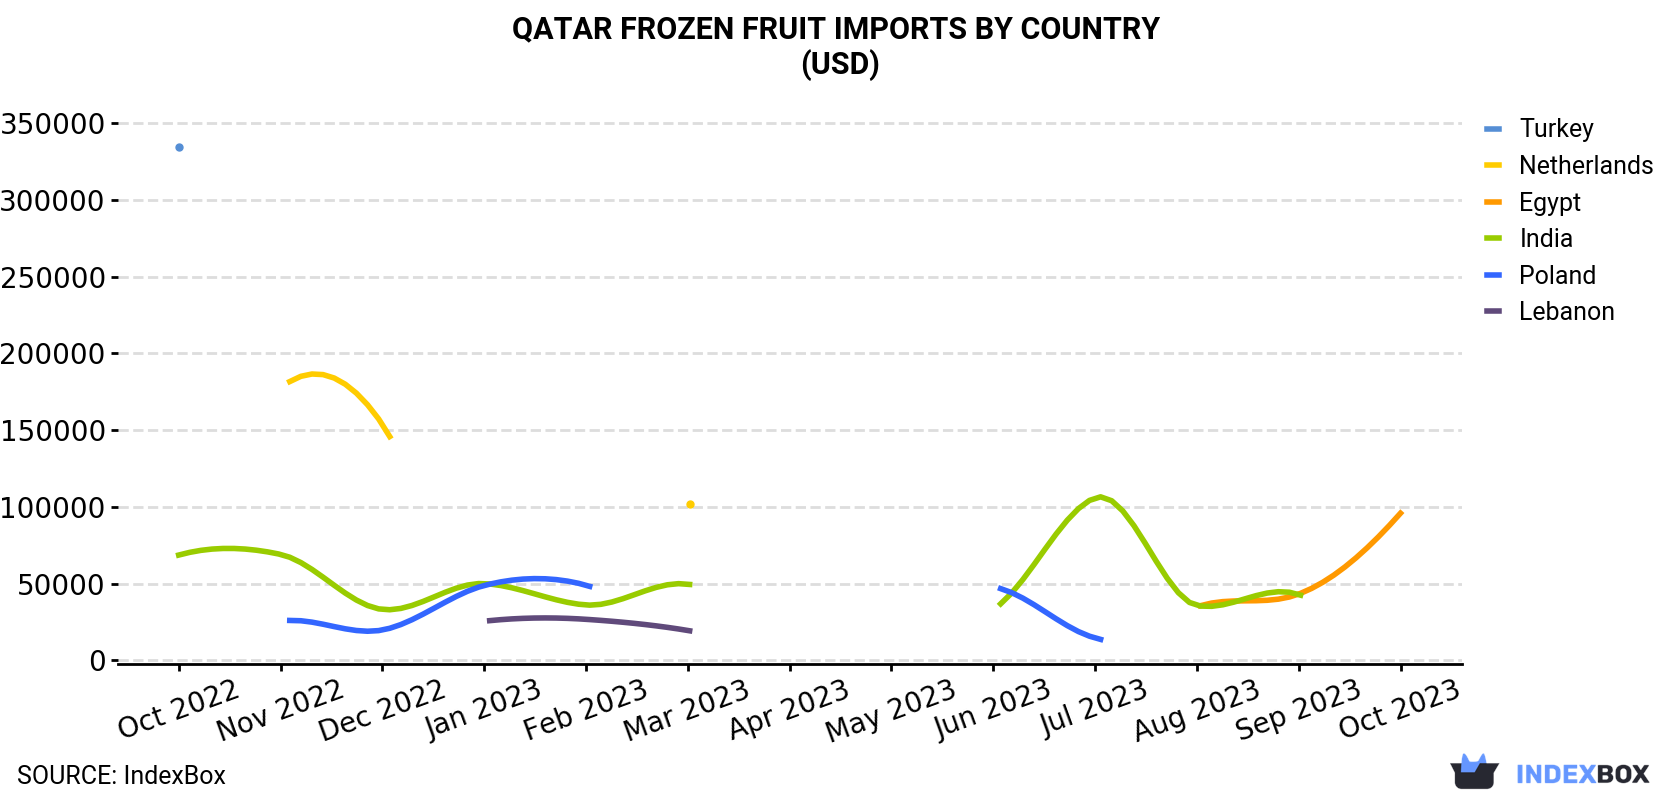 Qatar Frozen Fruit Imports By Country (USD)